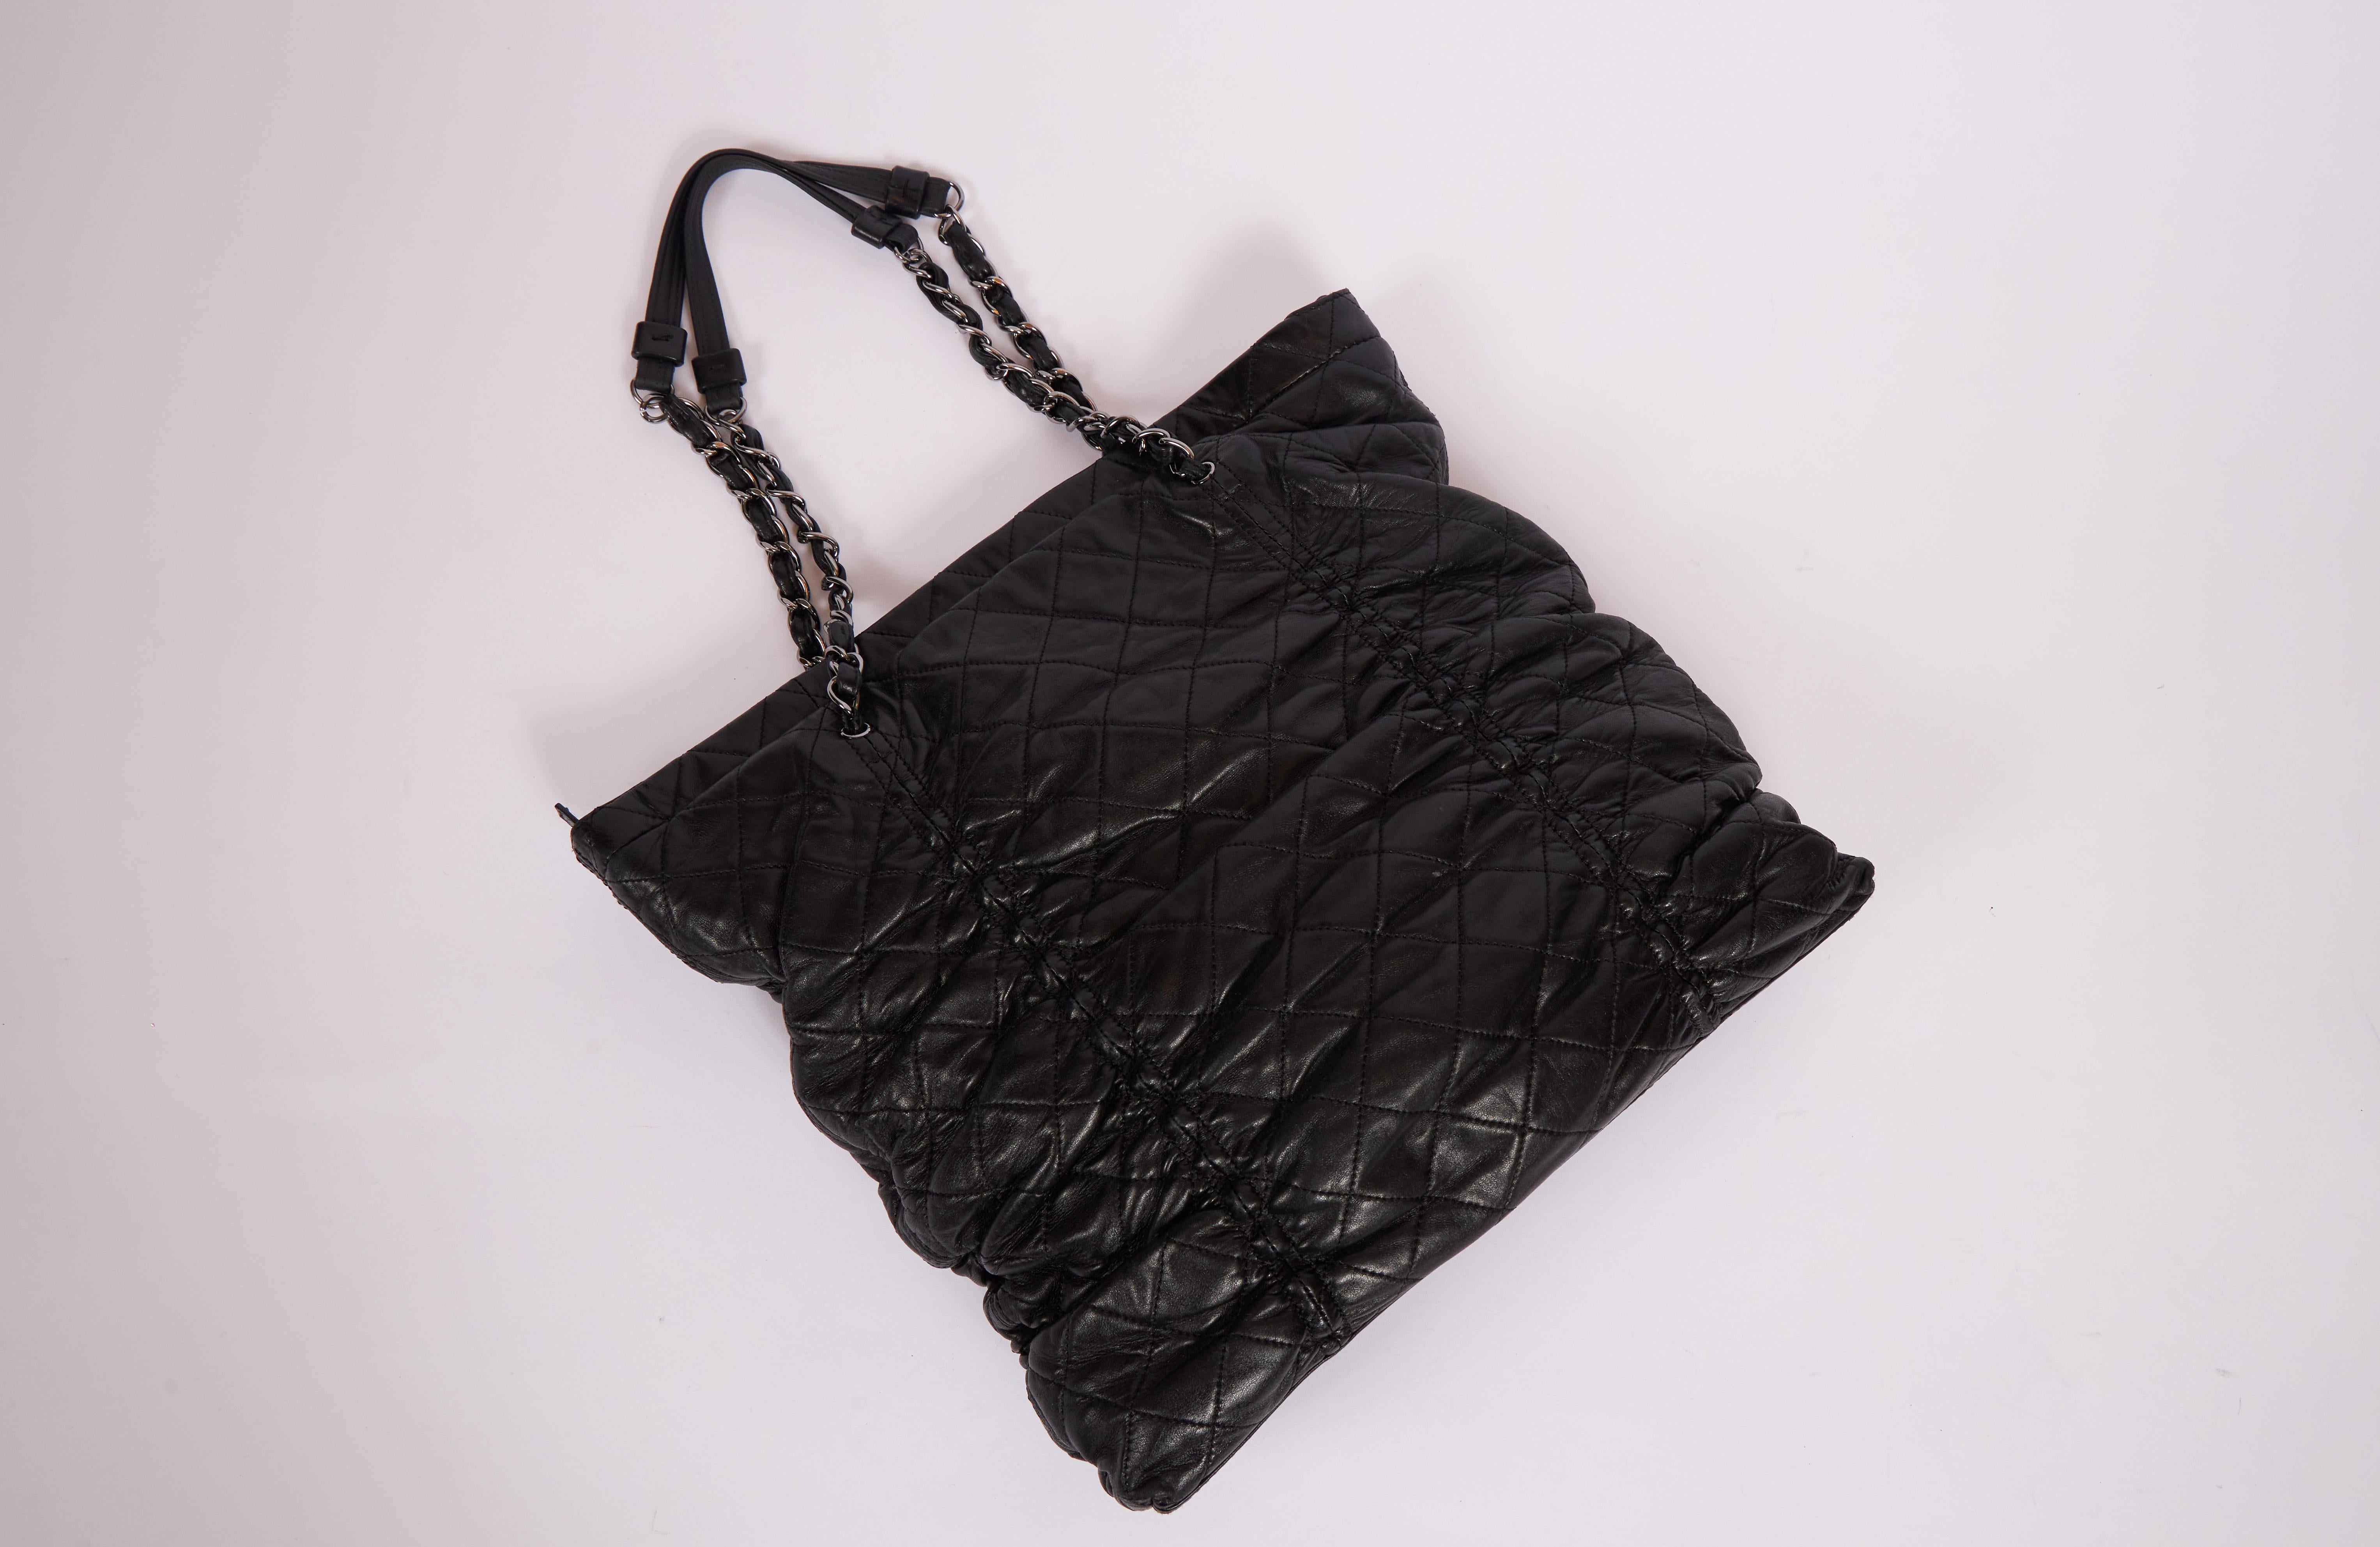 Chanel butter lambskin touched black shoulder tote. Top zipper. Hologram and generic dust cover. Shoulder drop 9